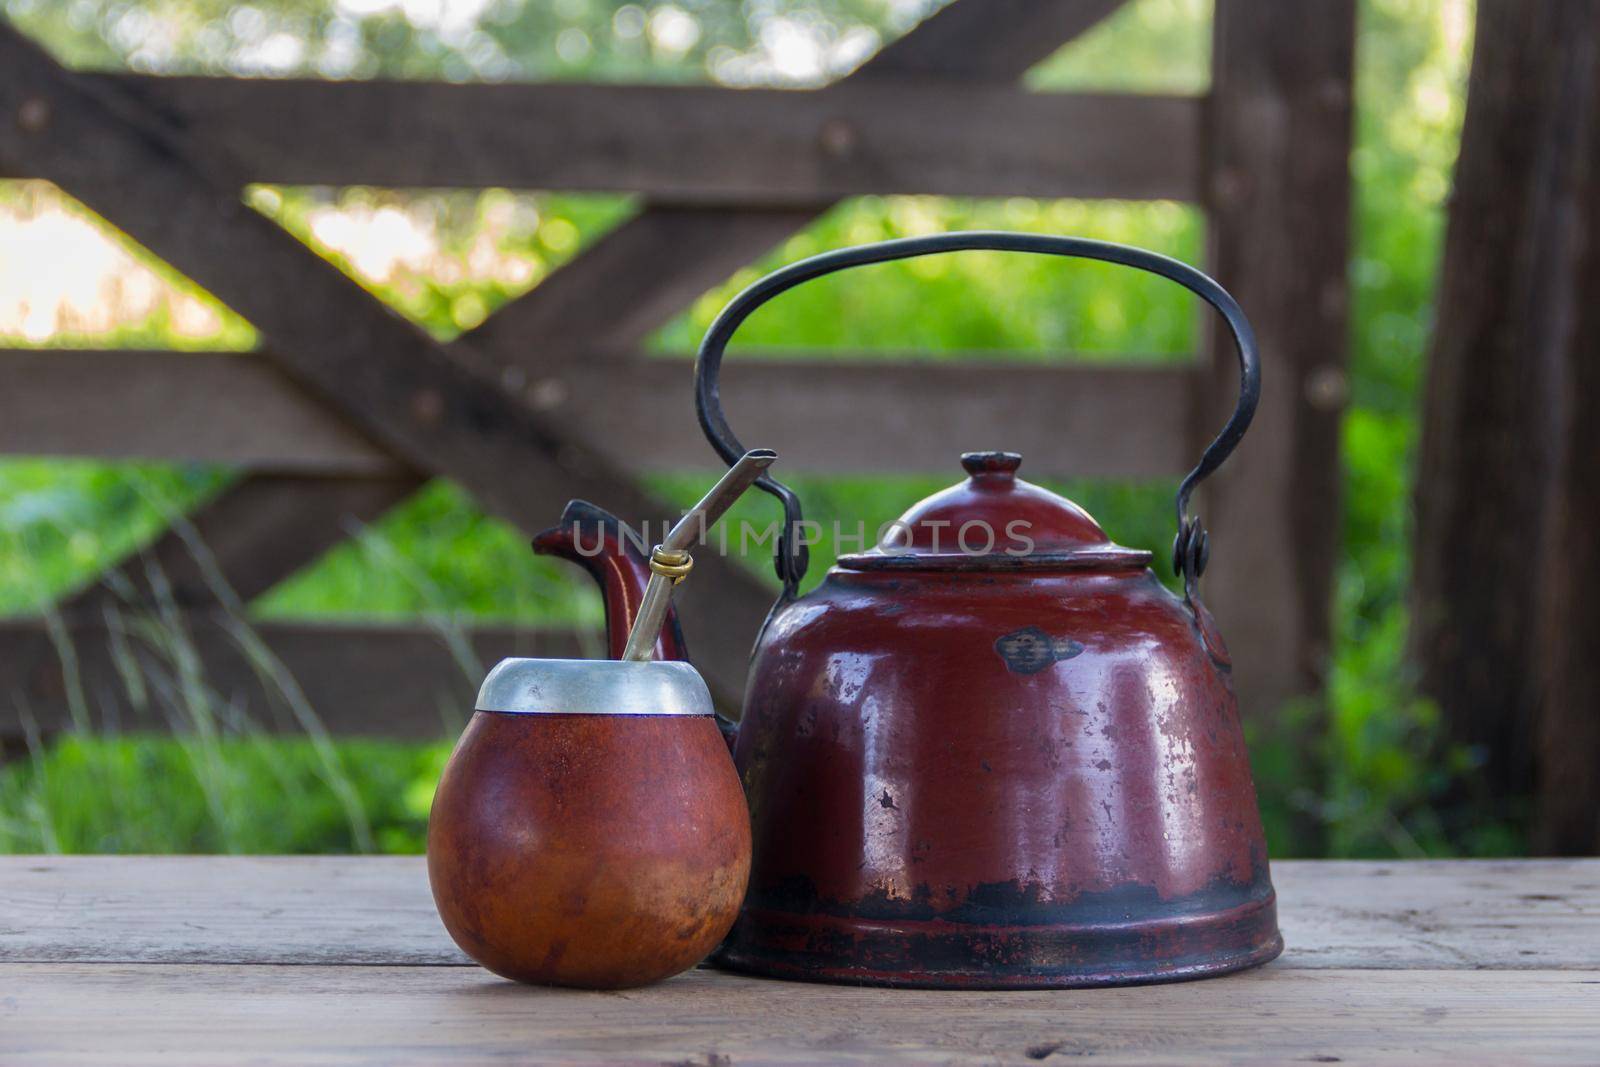 Kettle and yerba mate to drink the traditional infusion of Argentina and South America